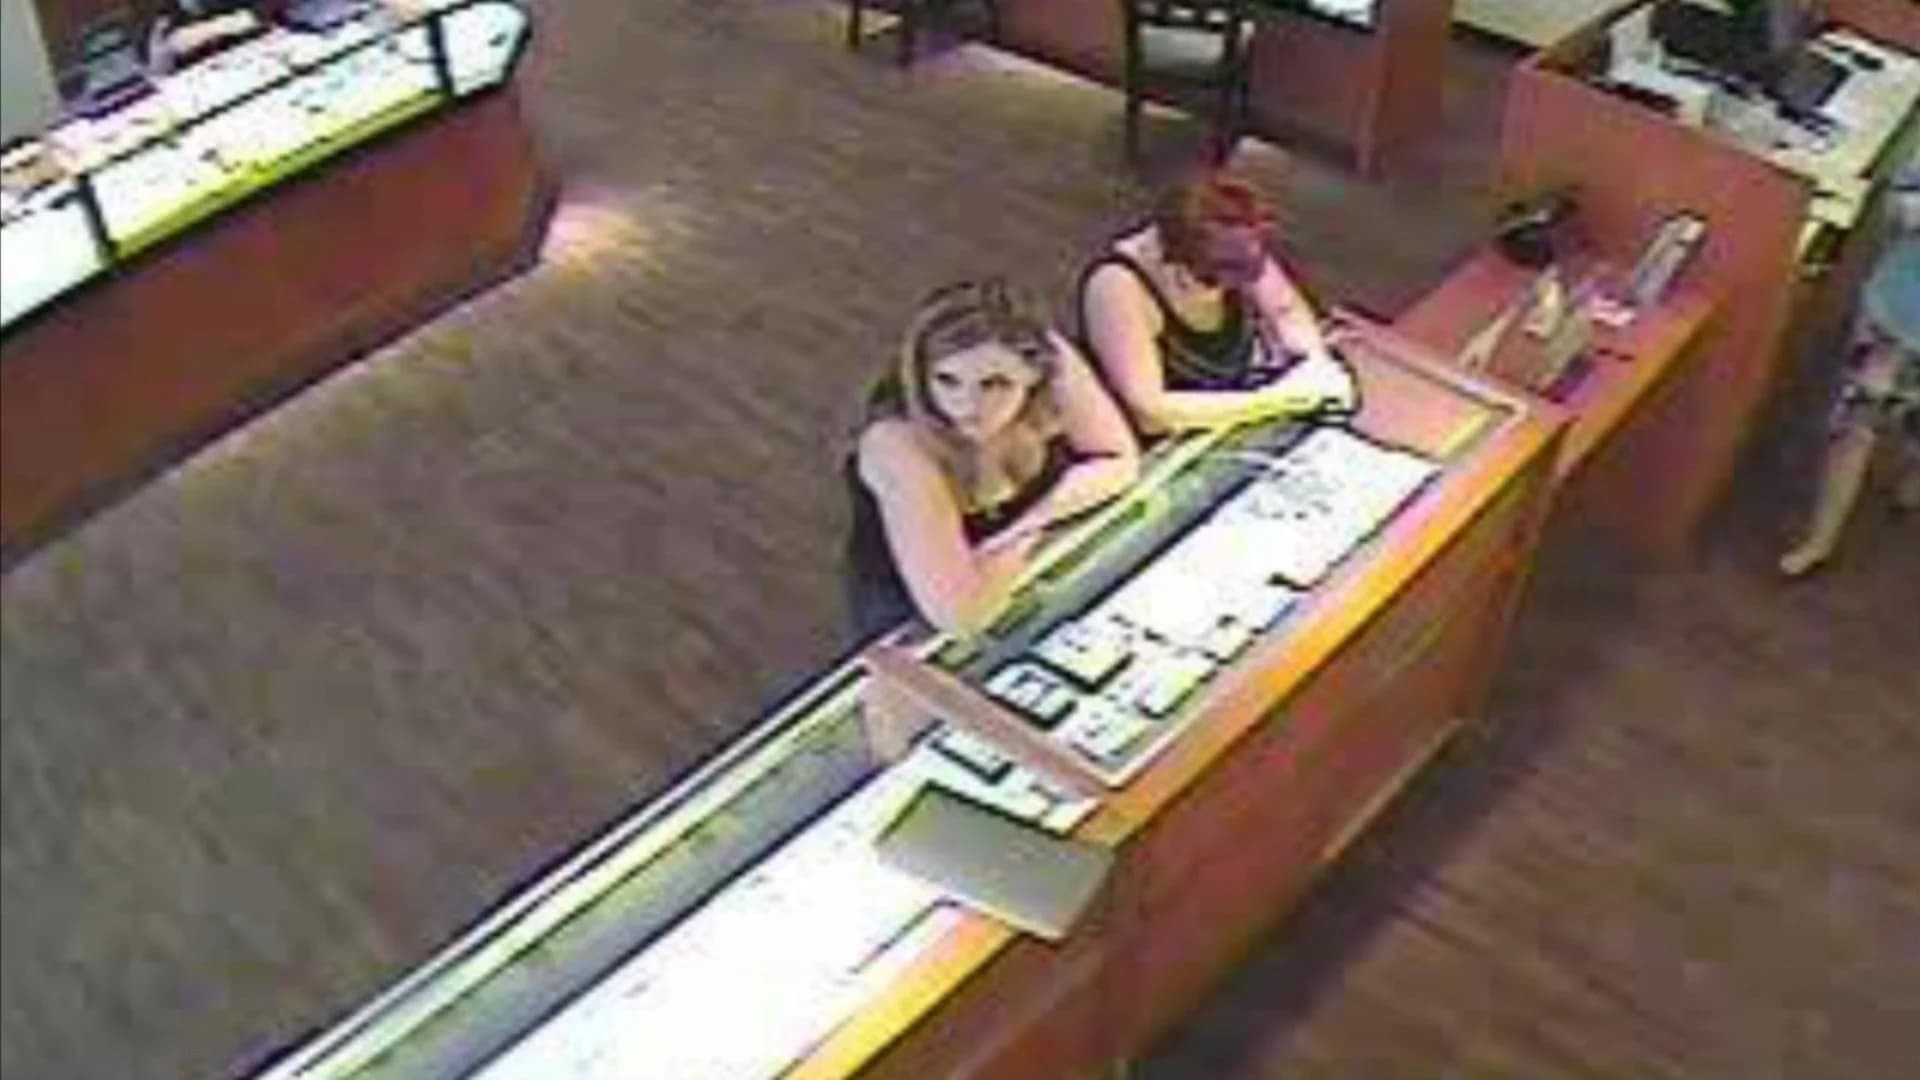 Police: Women used fake ID to open credit card, steal jewelry in Danbury